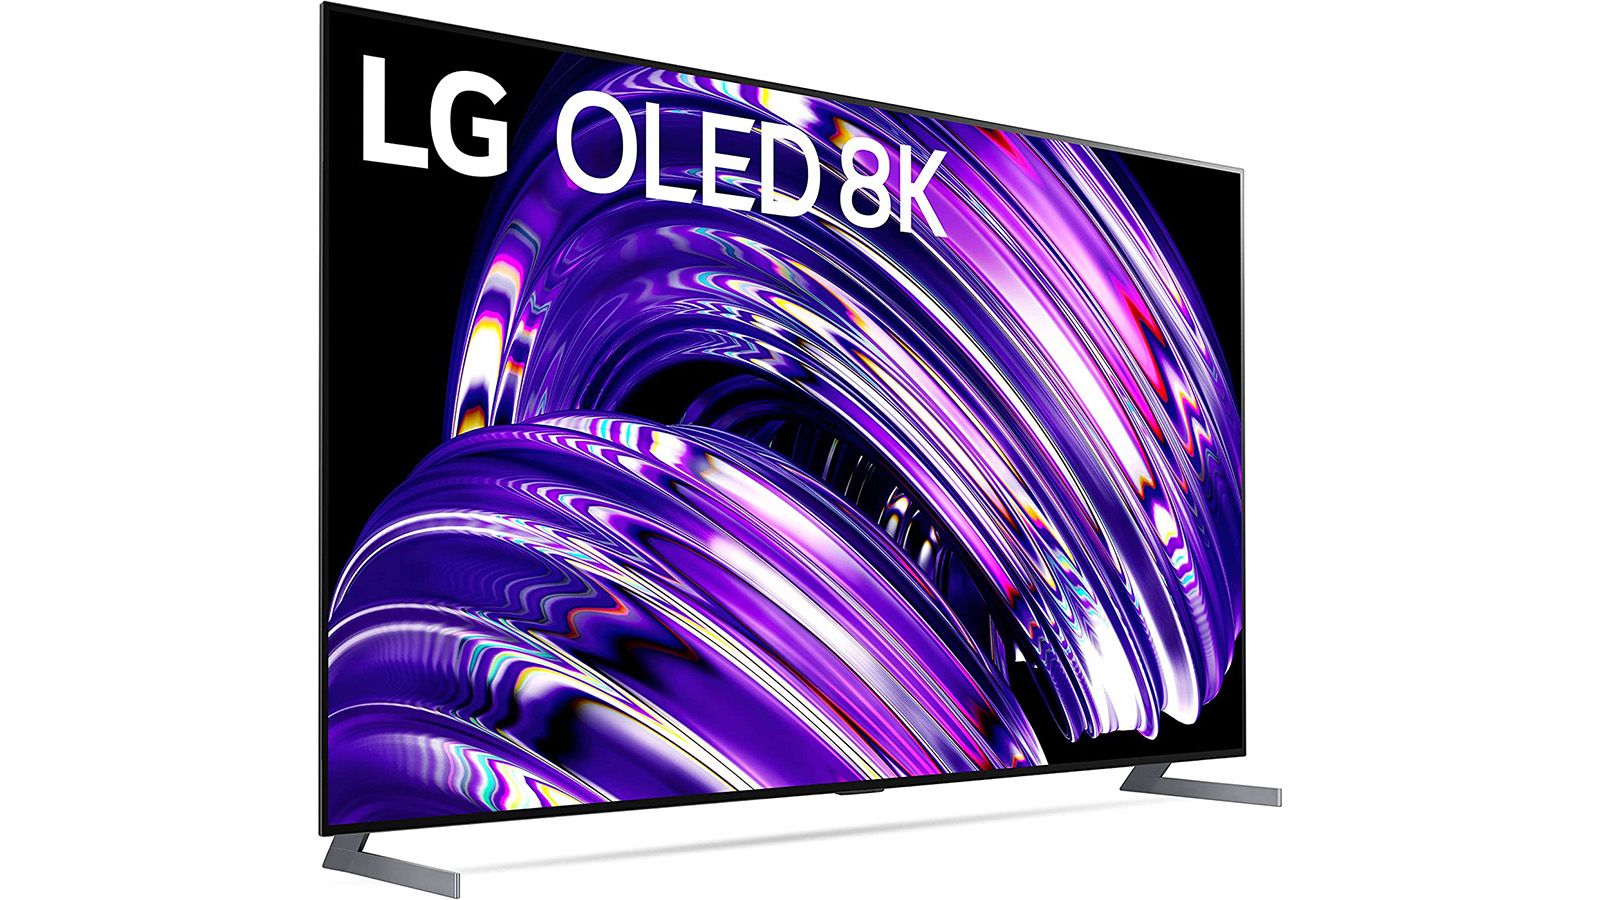 What Is 8K TV? - Which?